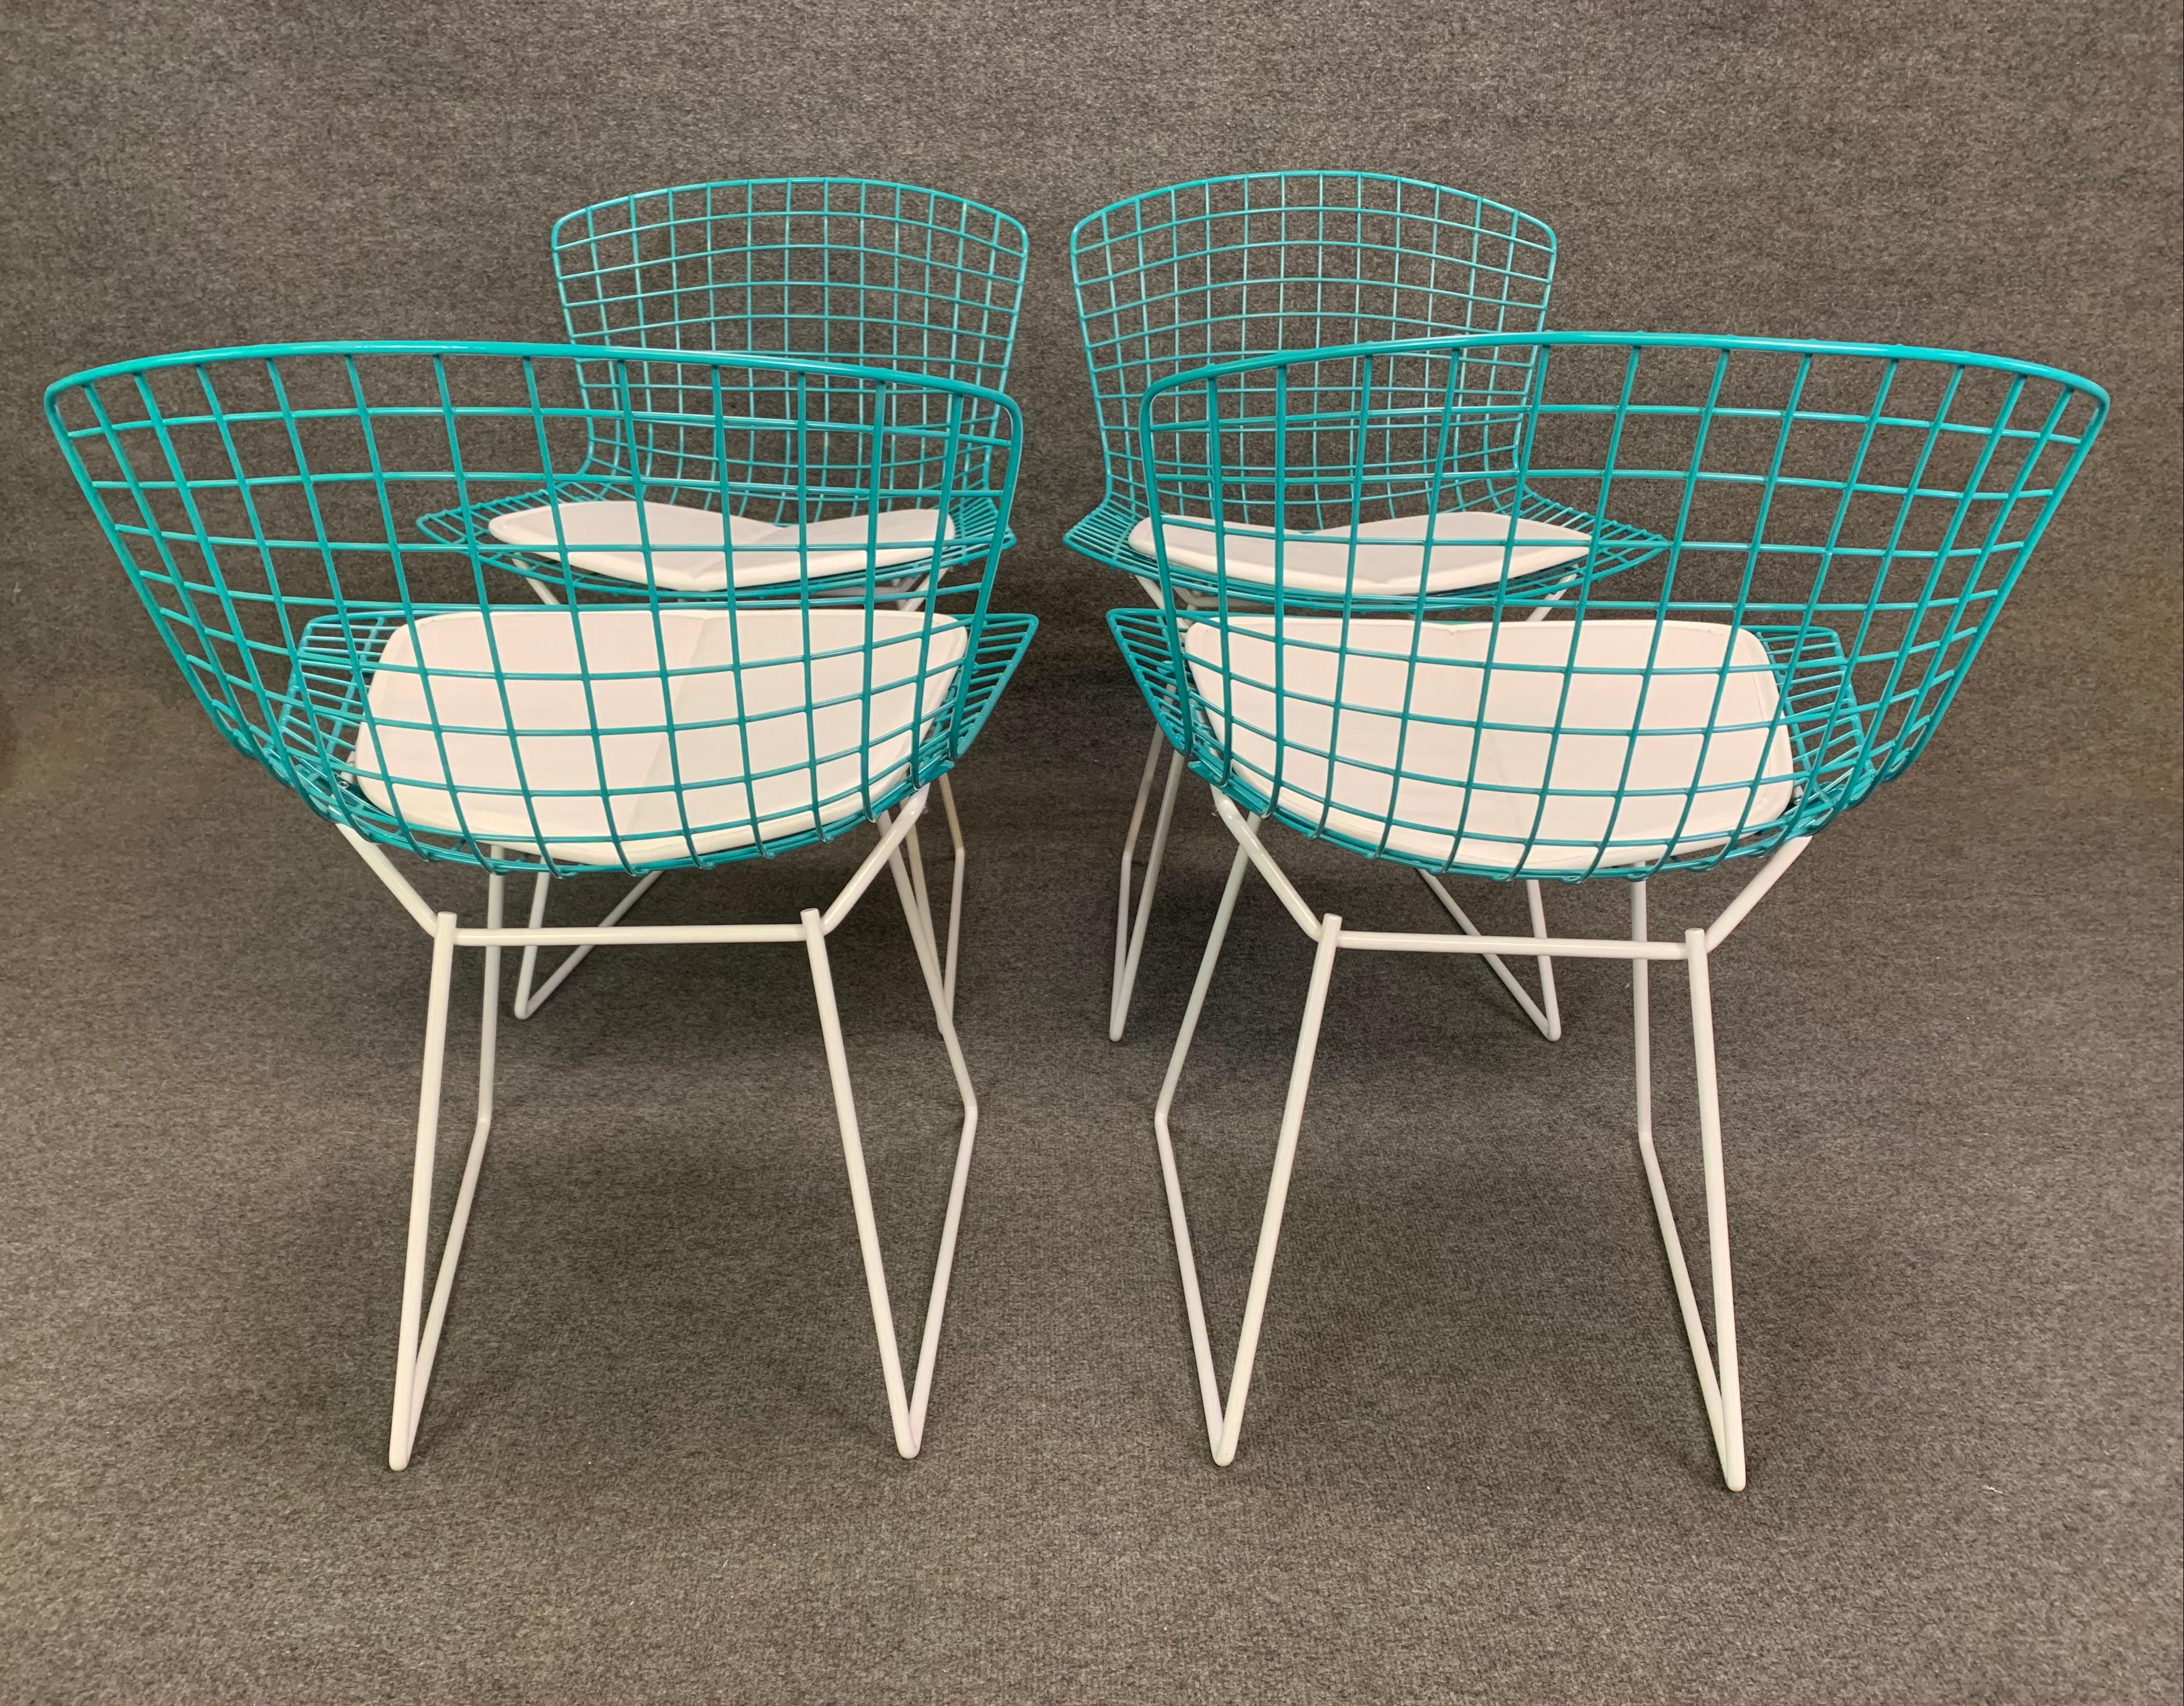 Welded Set of Four Vintage Mid-Century Modern Dining Chairs by Harry Bertoia for Knoll For Sale